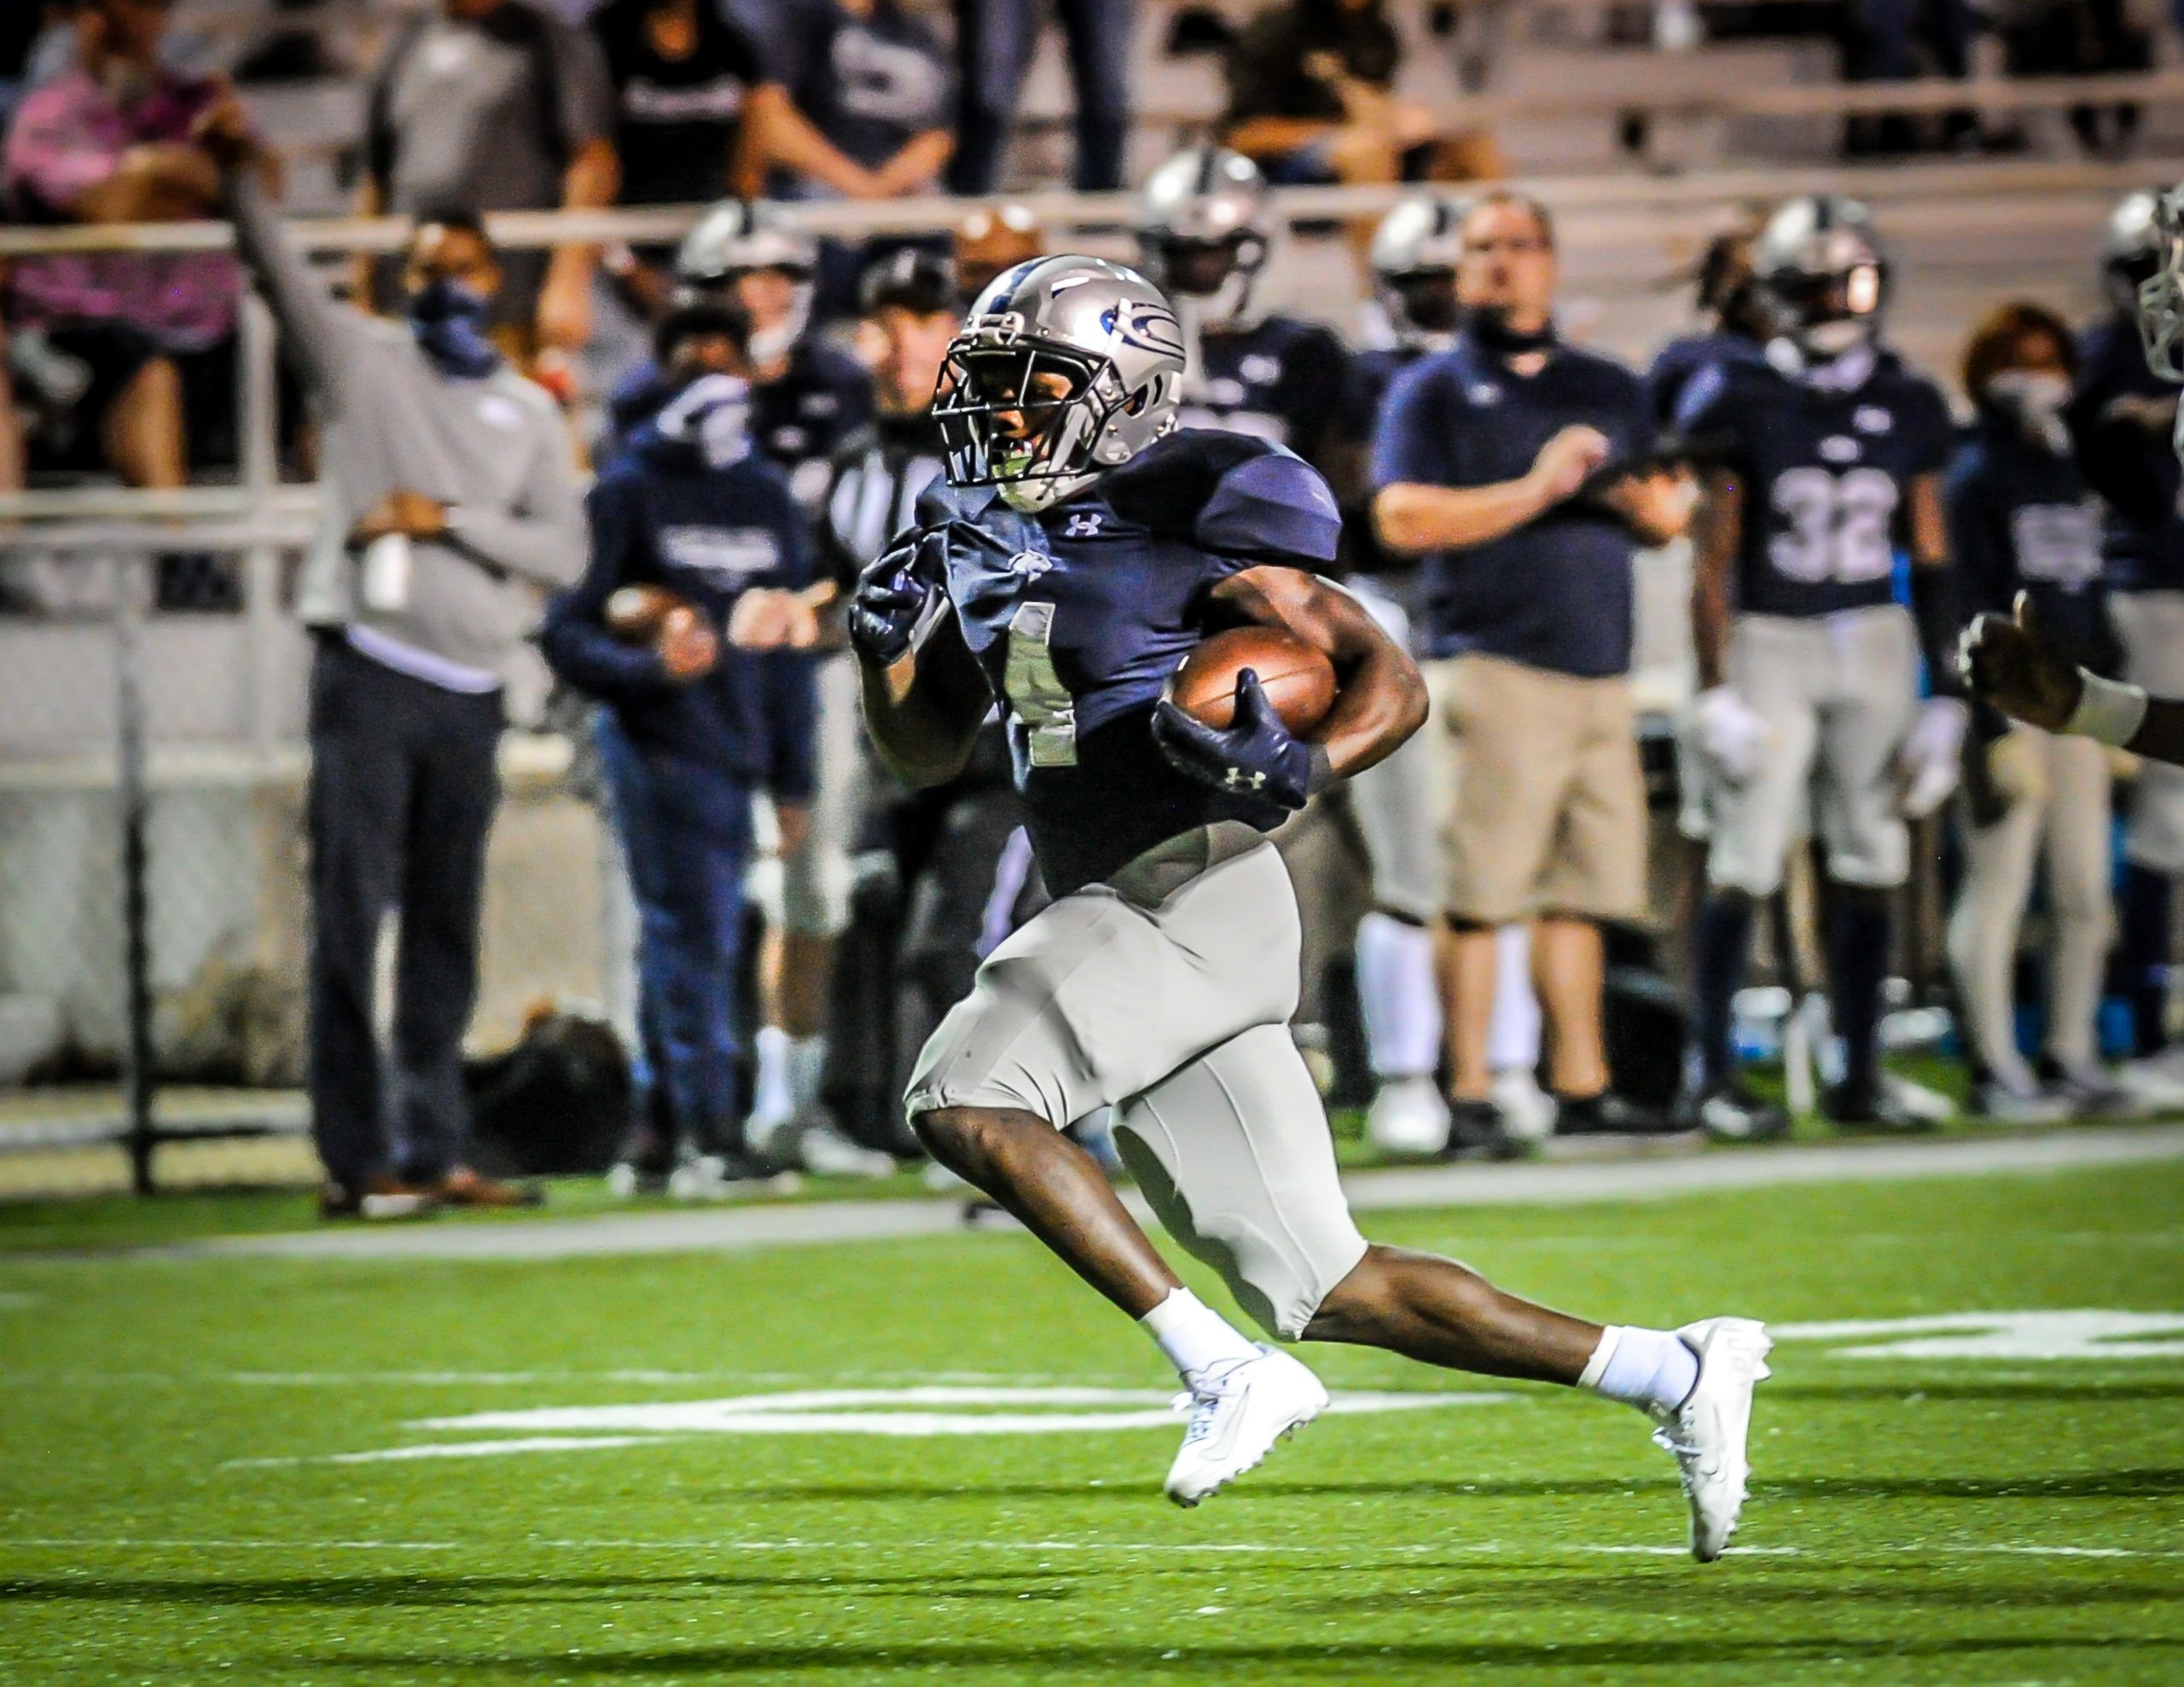 Clay-Chalkville tops Huffman, 49-20